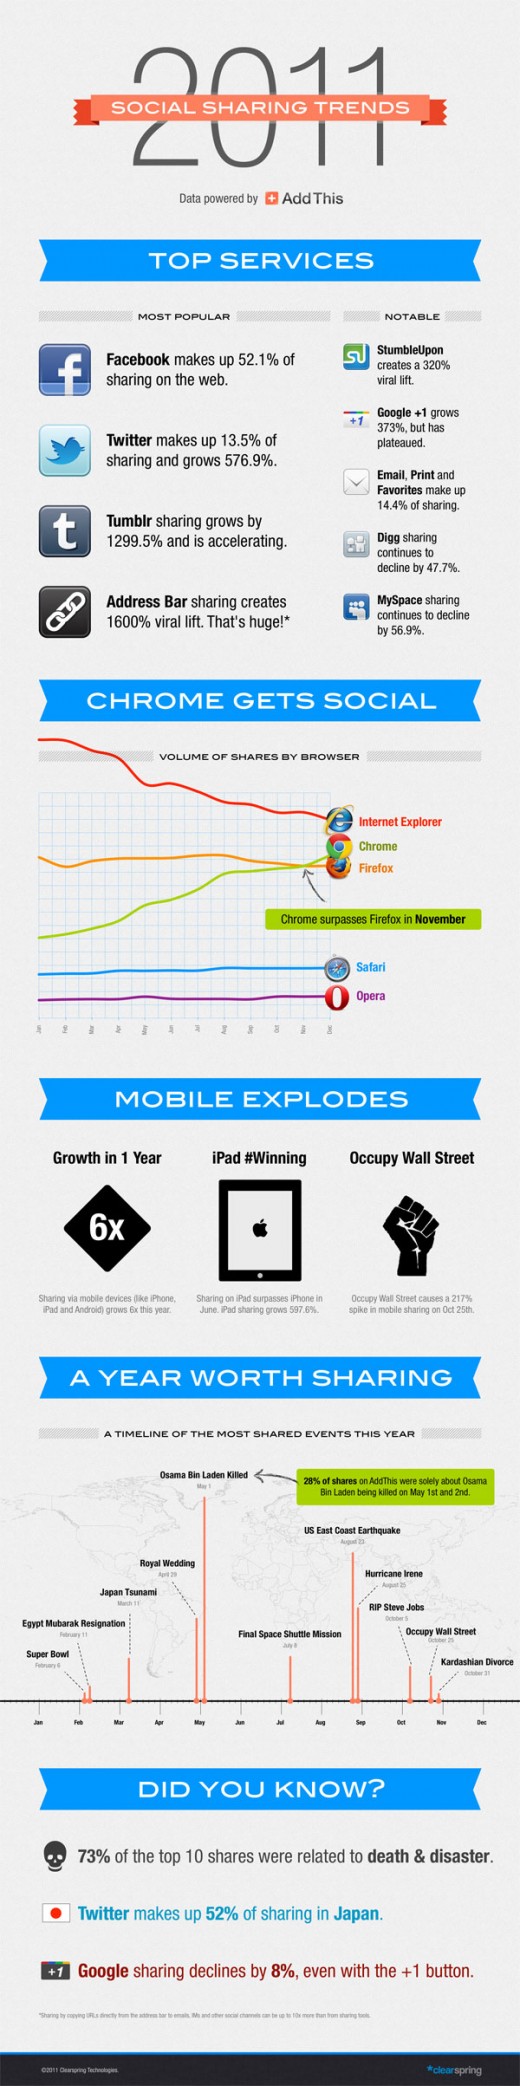 Sharing Trends On Internet In 2011 [Infographic]